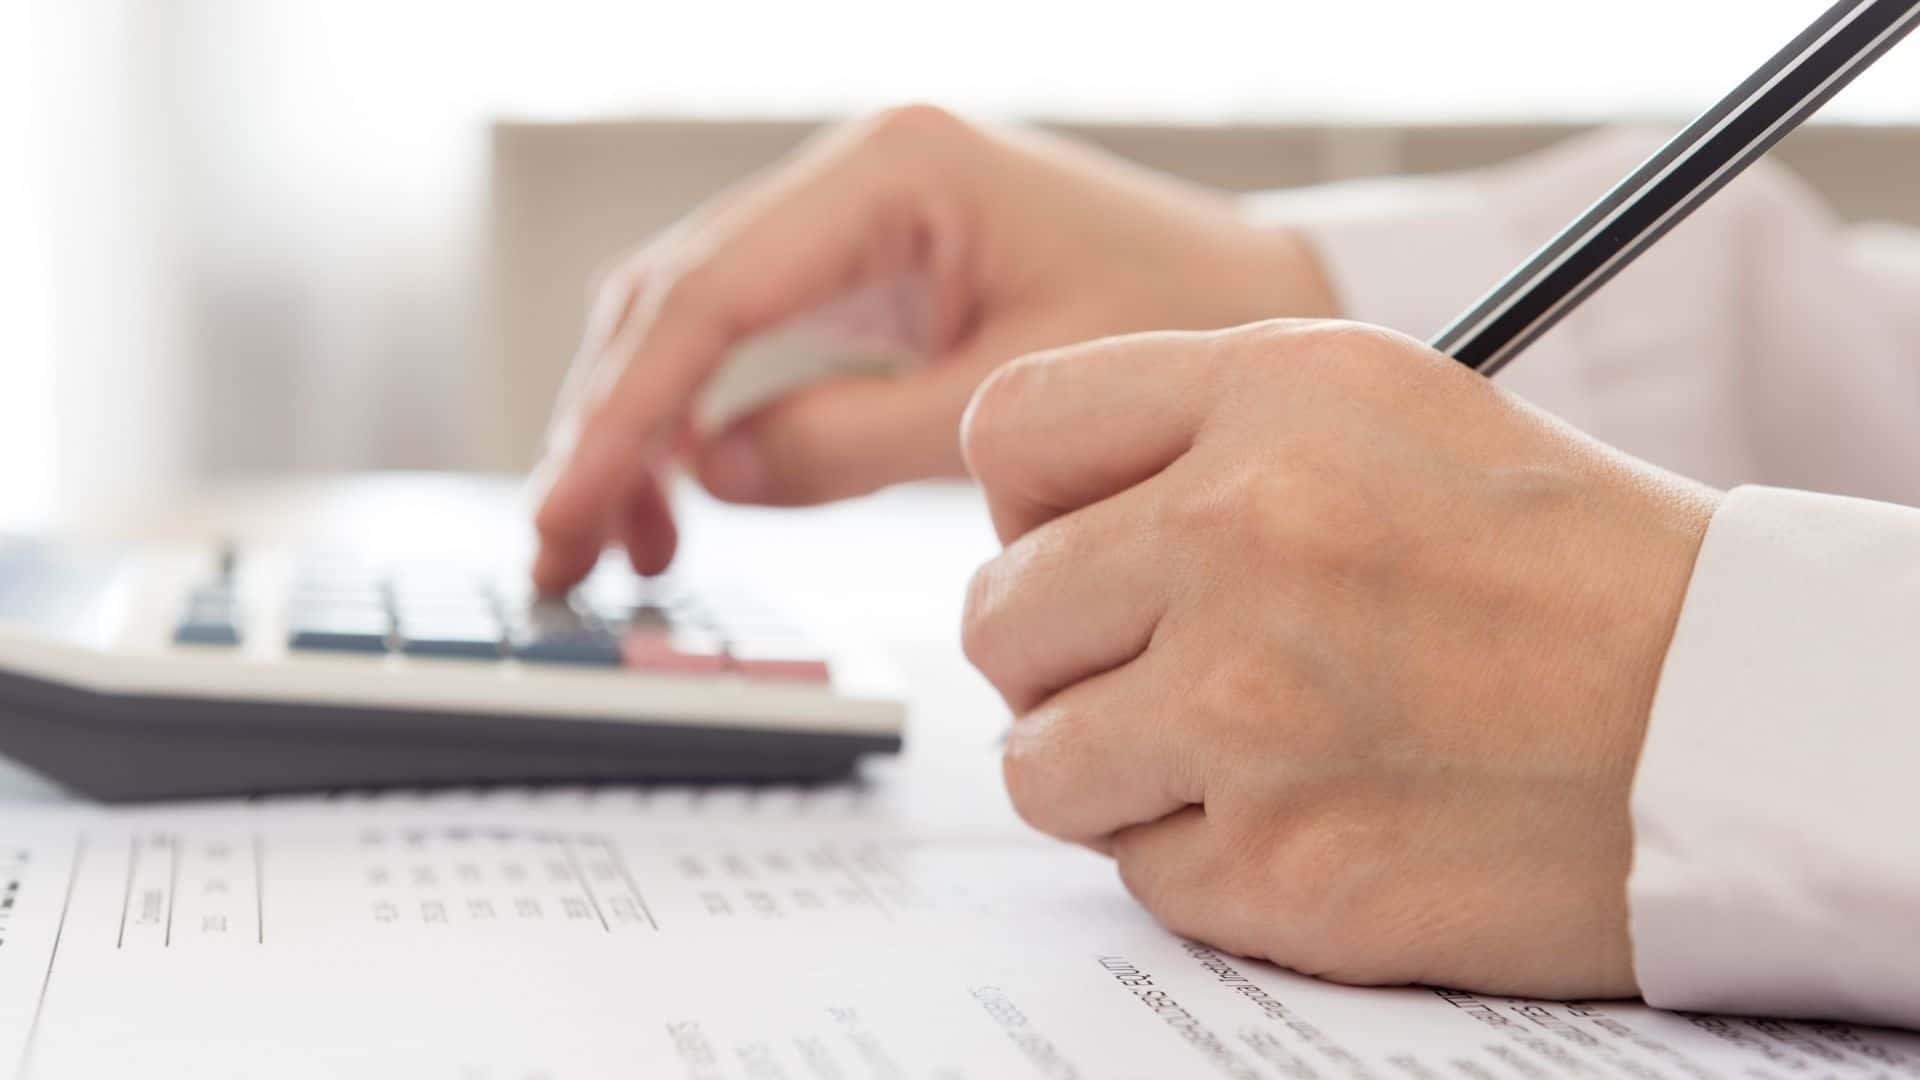 Bookkeeping mistakes